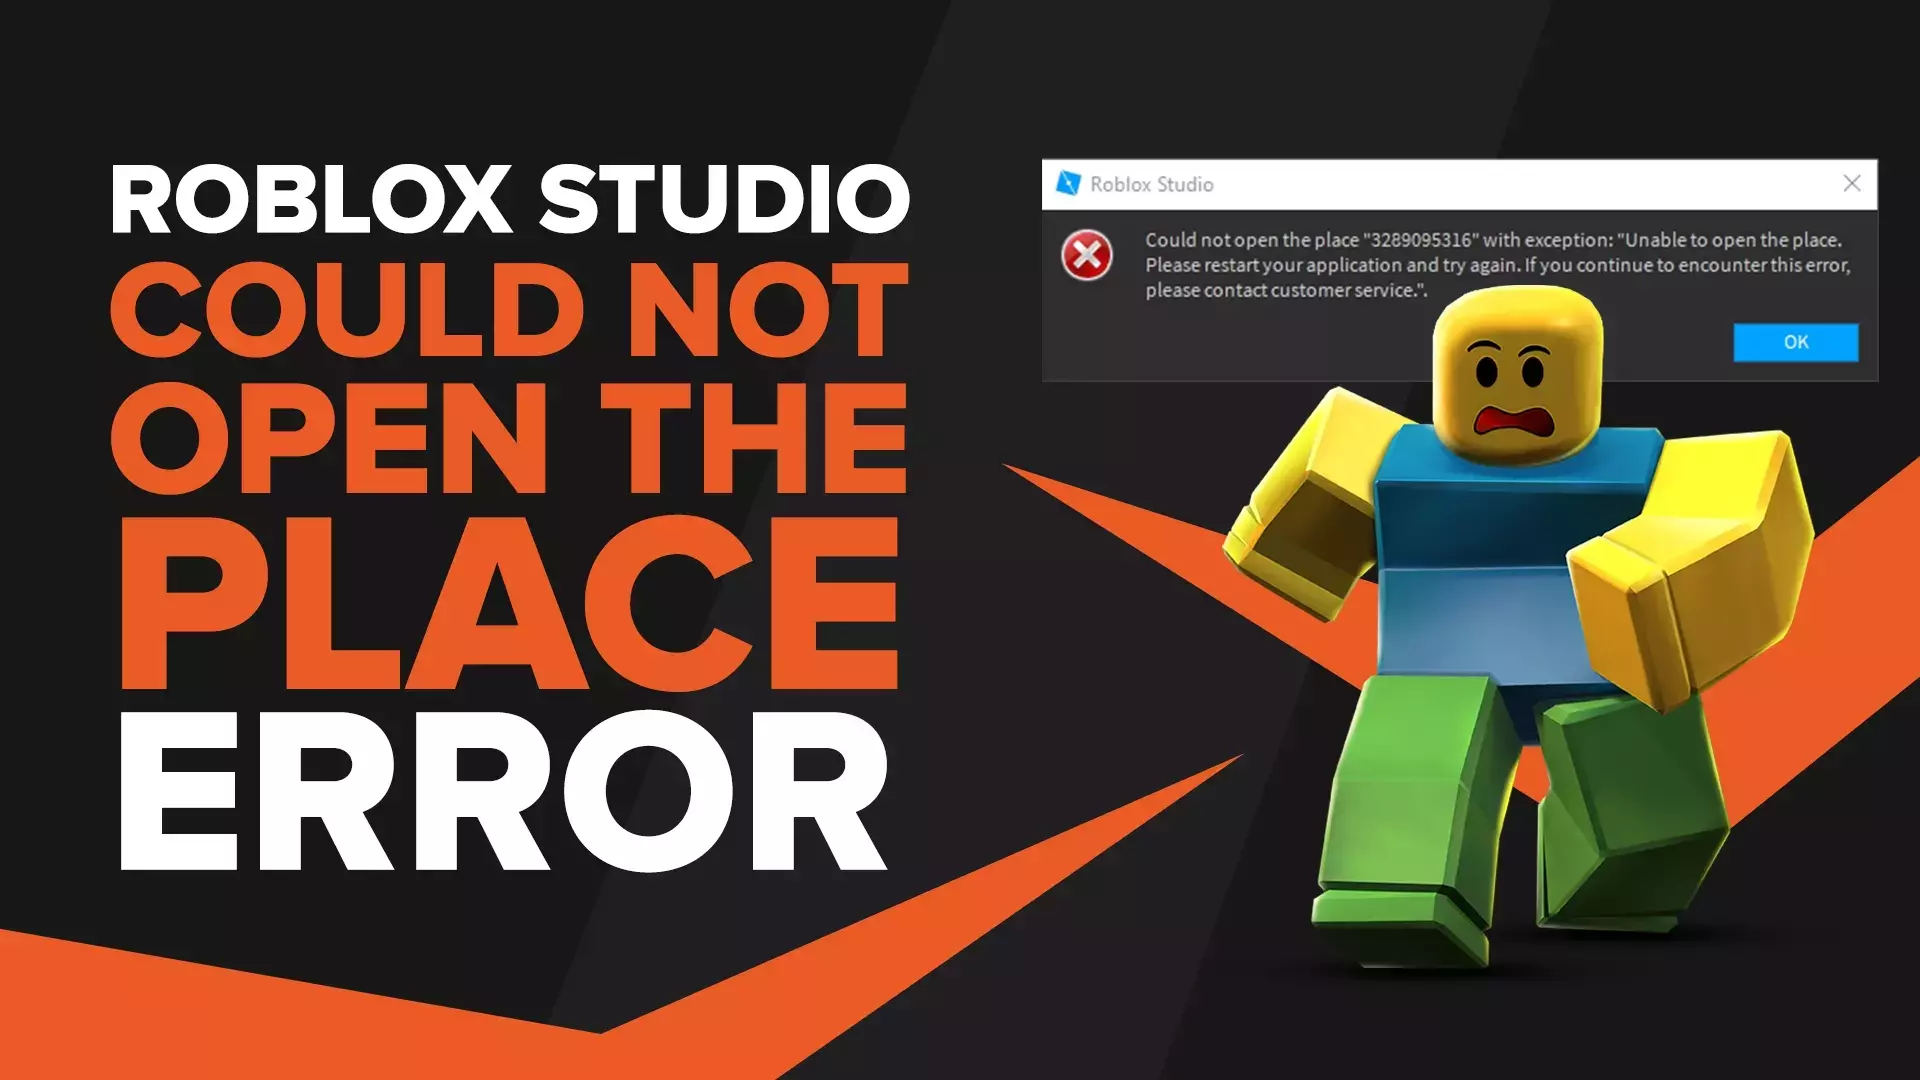 [Solved] How to Fix Roblox Studio Error Could Not Open the Place Easily